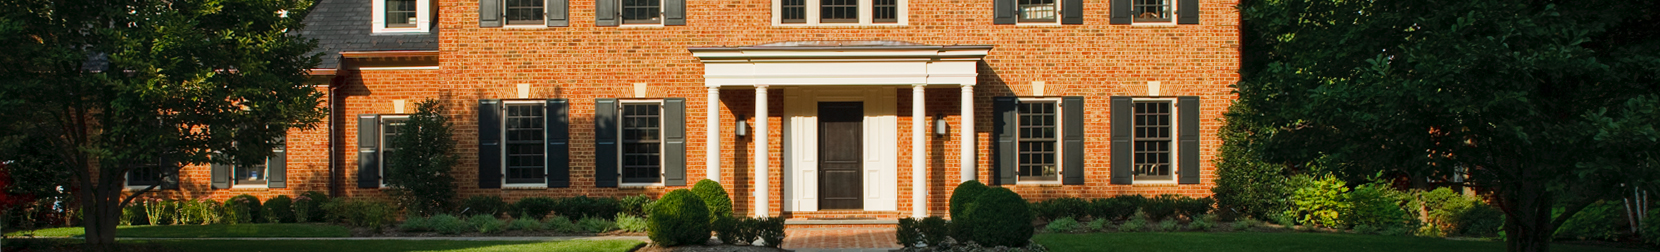 Exterior of a brick colonial home with black shutters